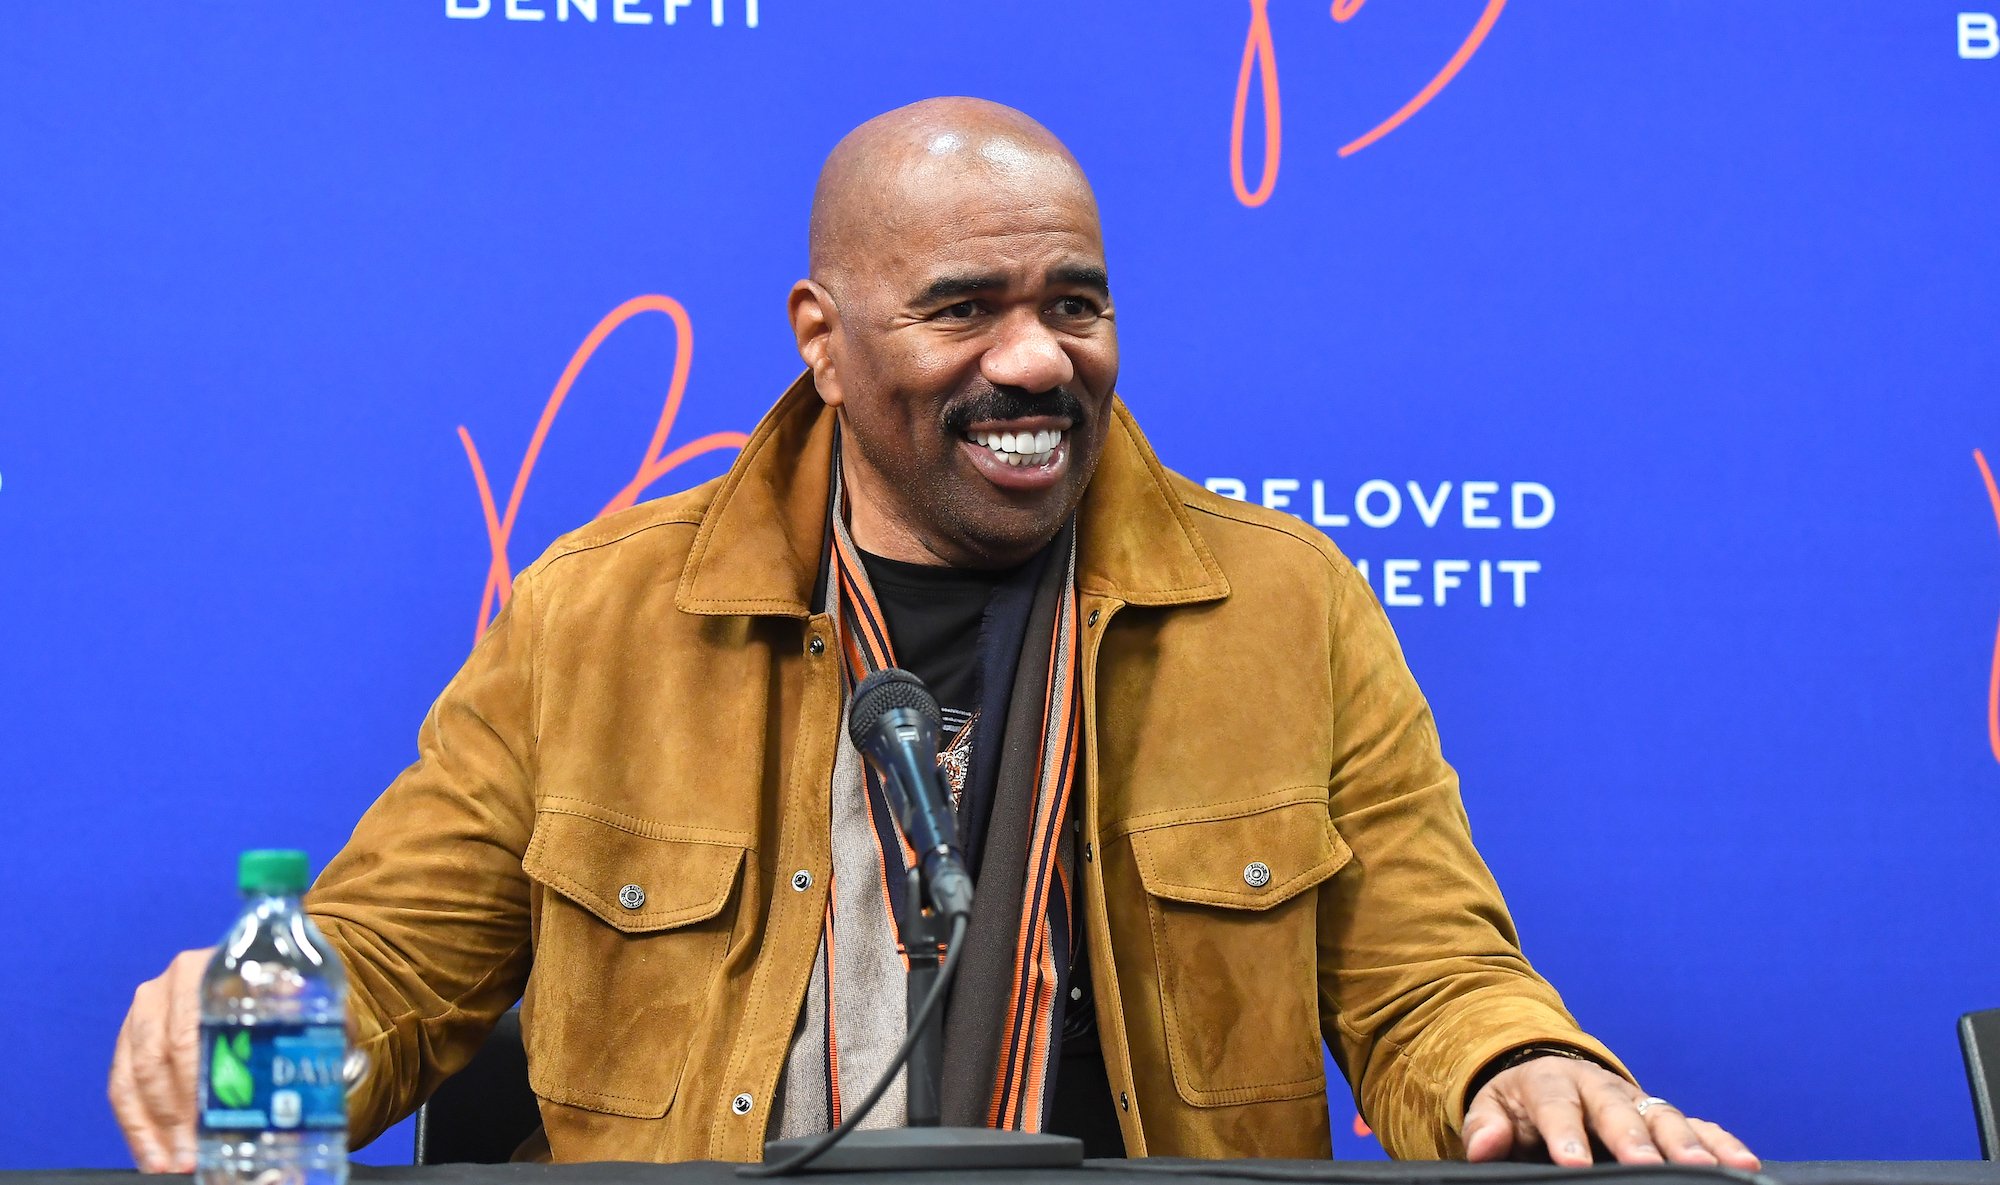 Steve Harvey smiling in front of a blue background